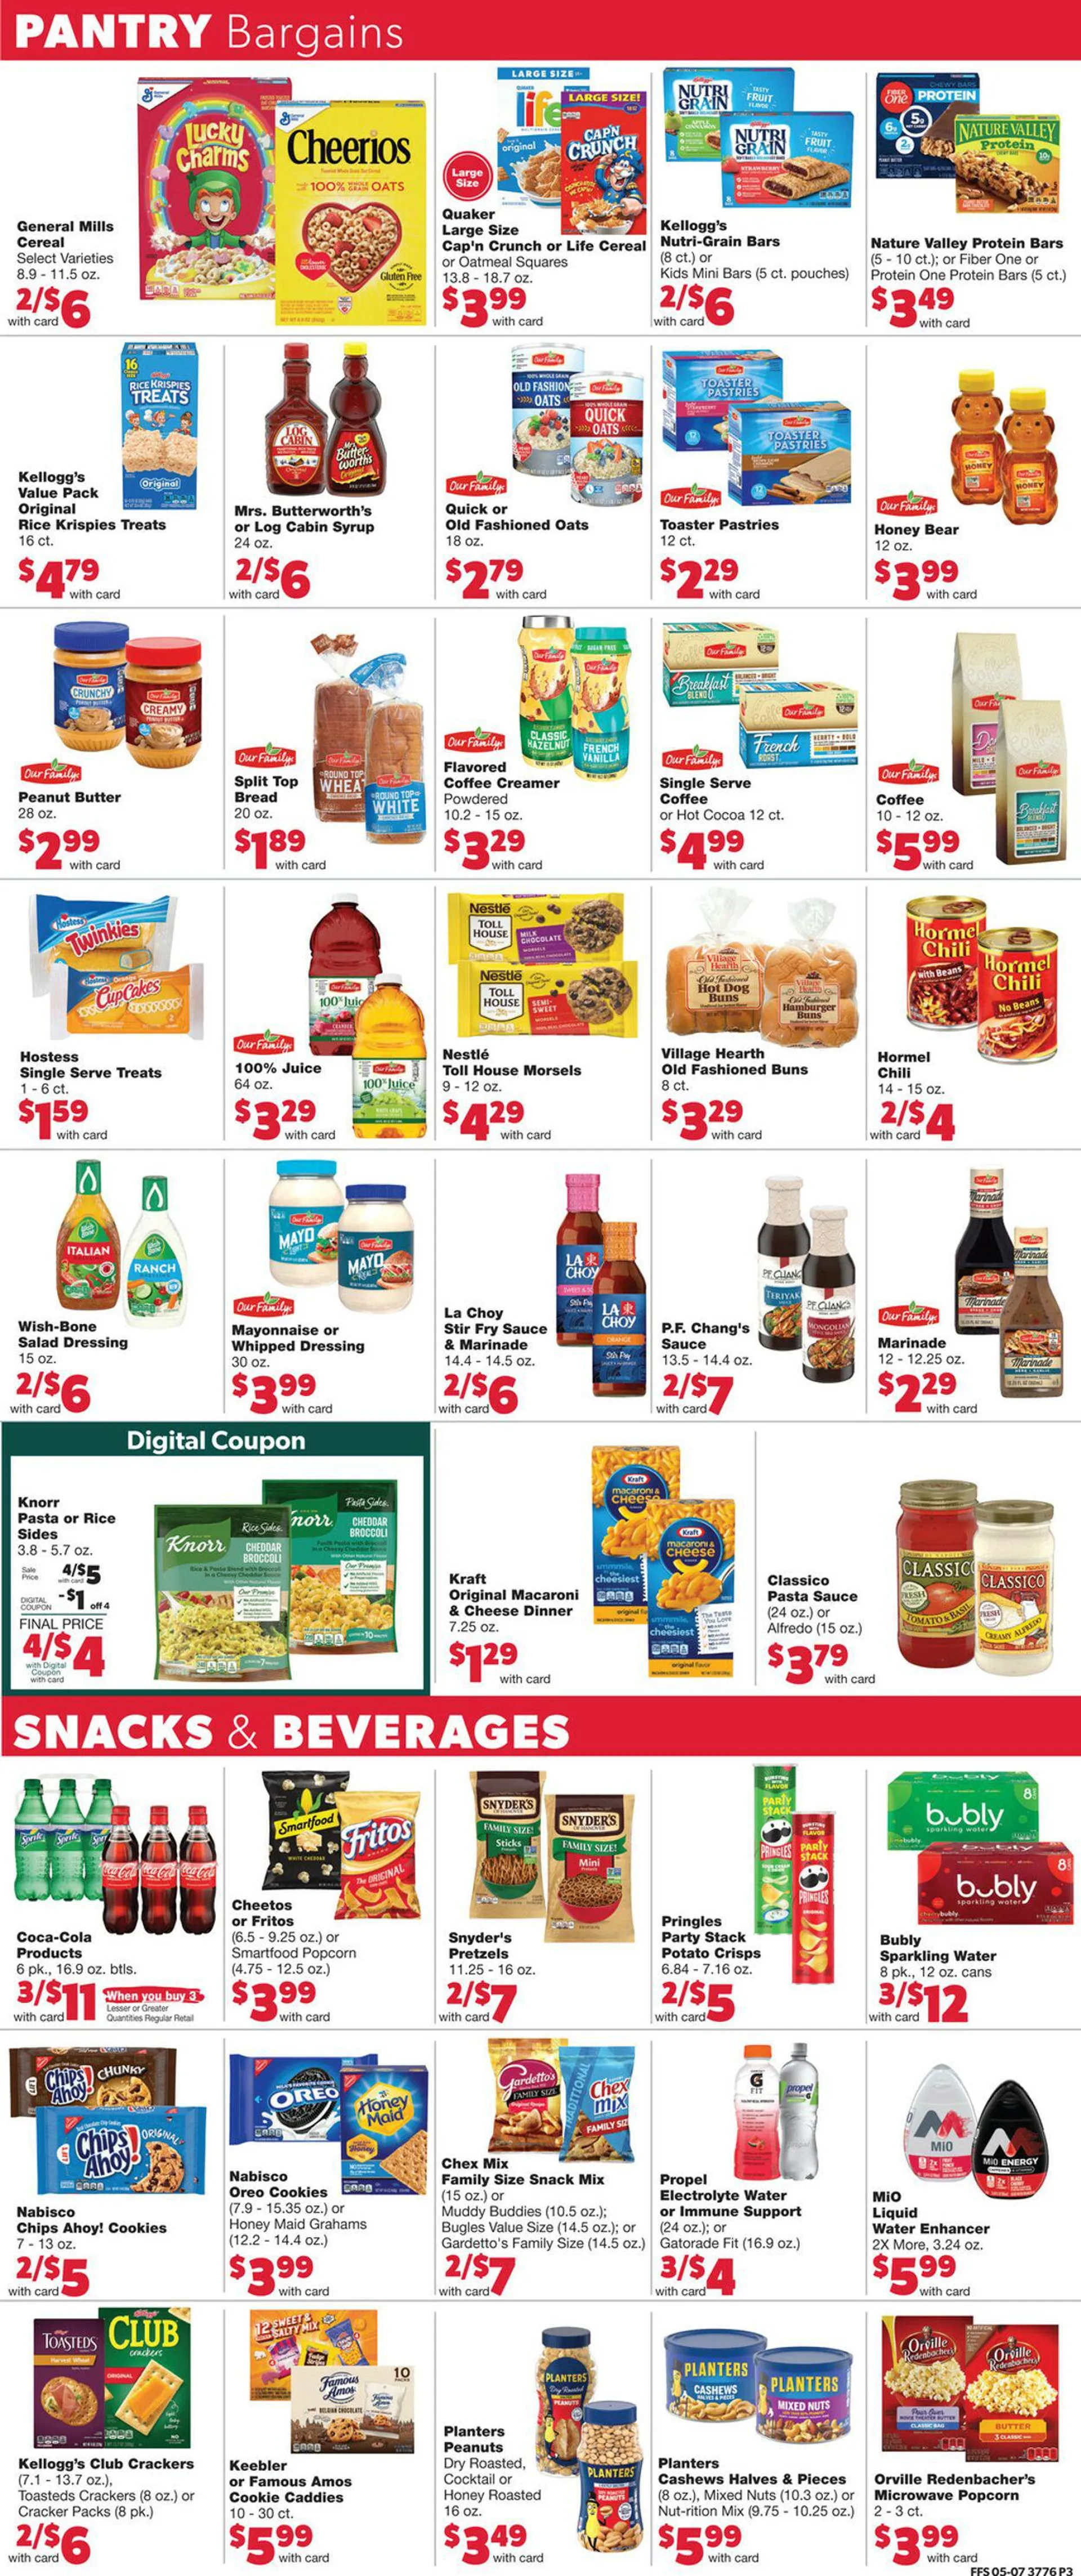 Family Fare Current weekly ad - 2